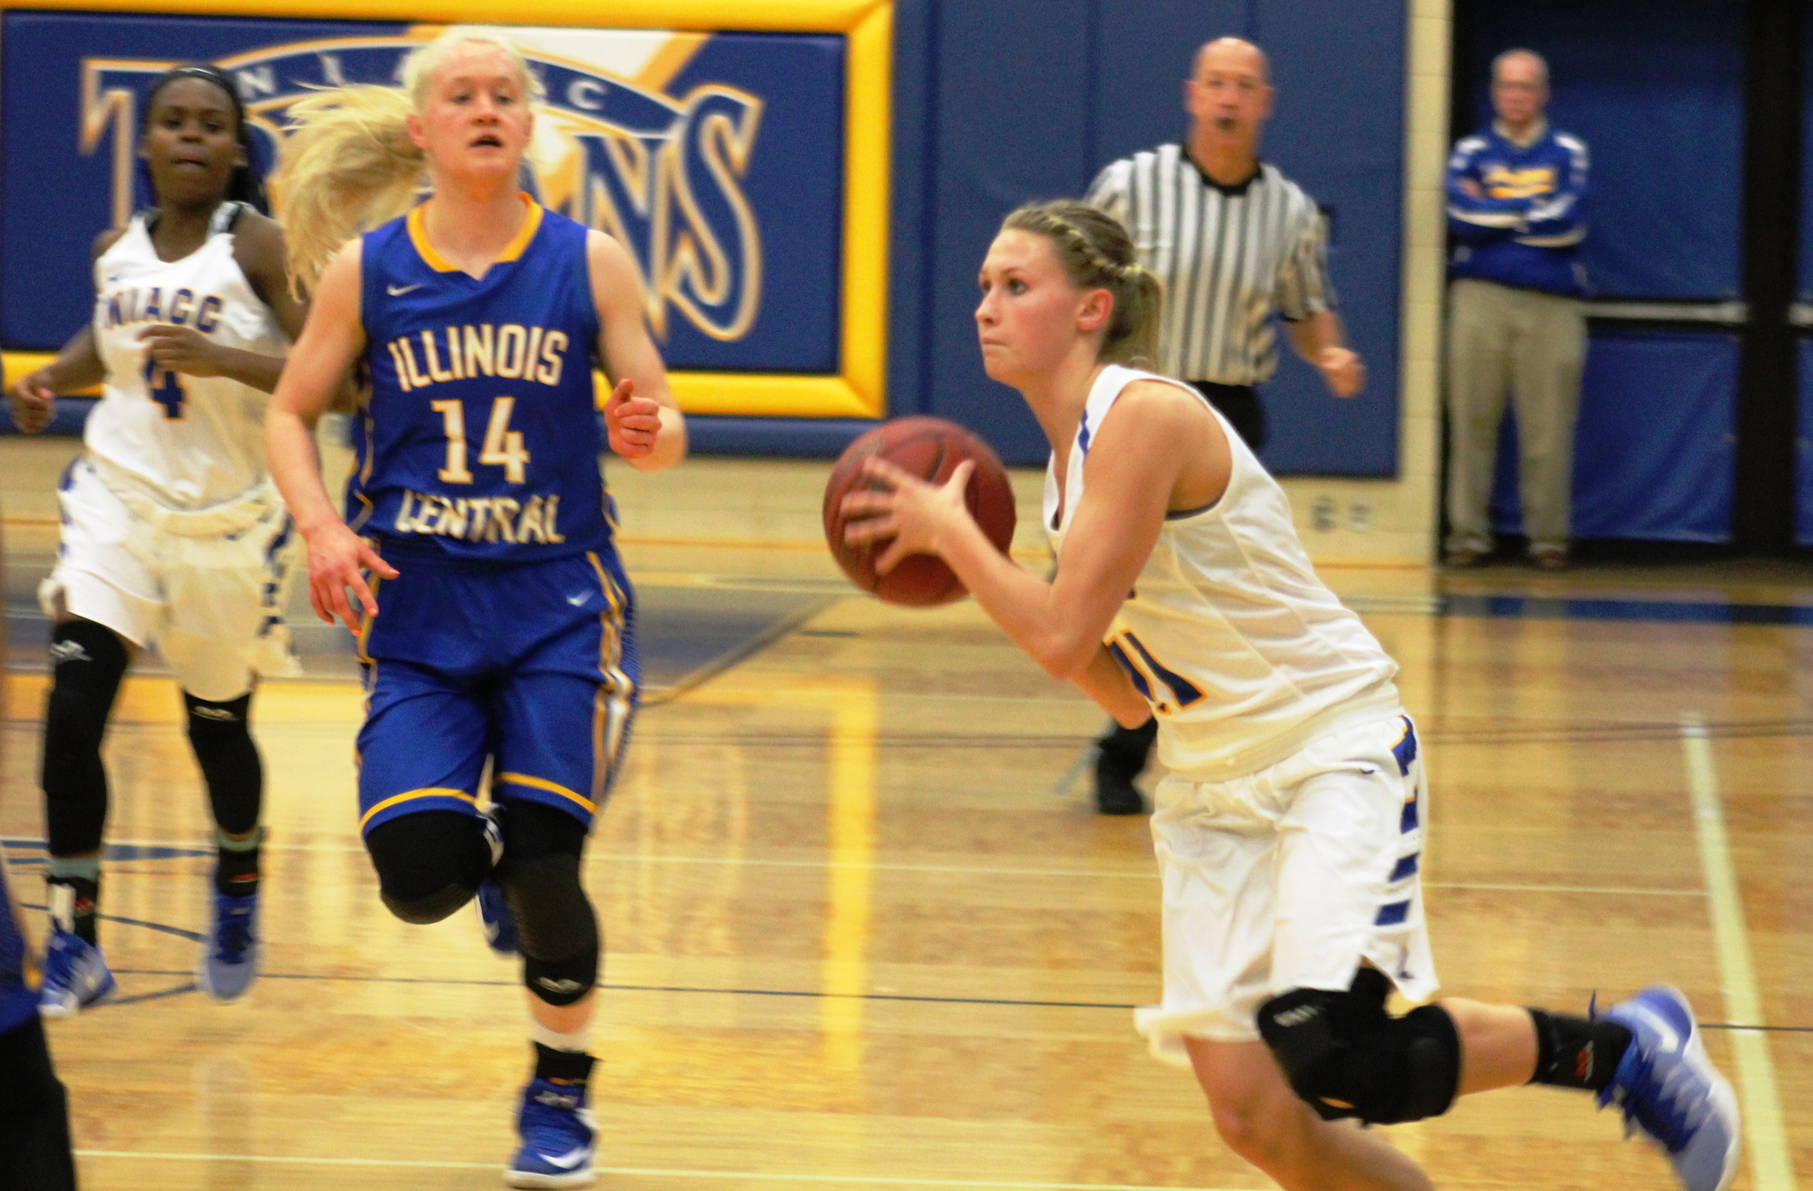 NIACC's Larson earns NJCAA Division II national player of week  honor